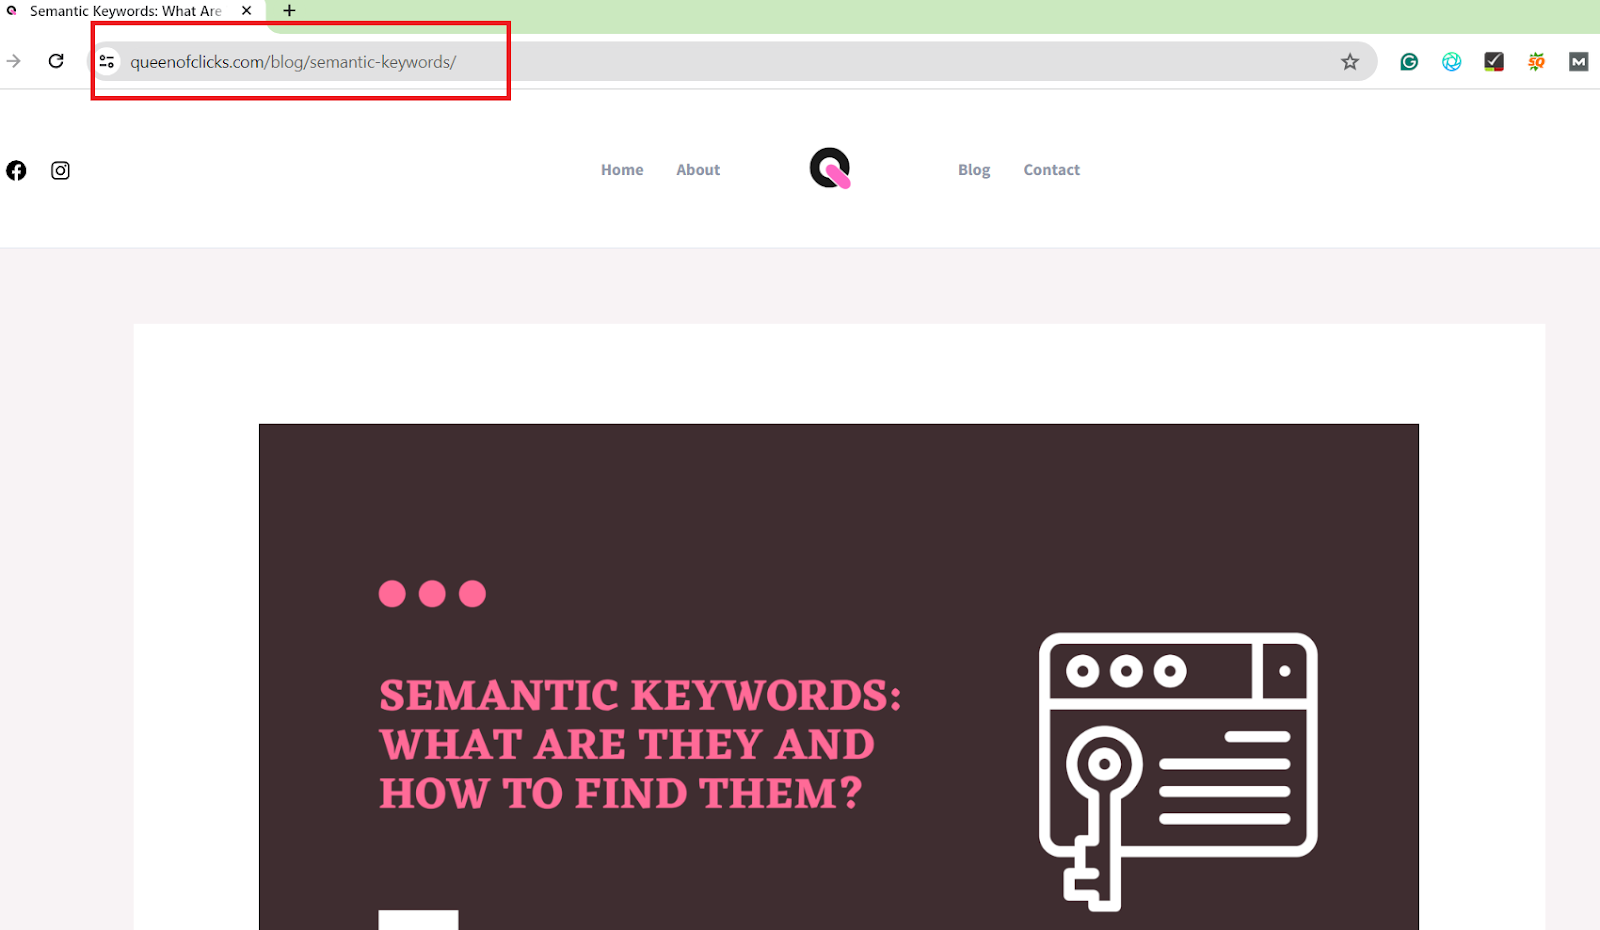 example of queen of clicks short url that contains the target keyword